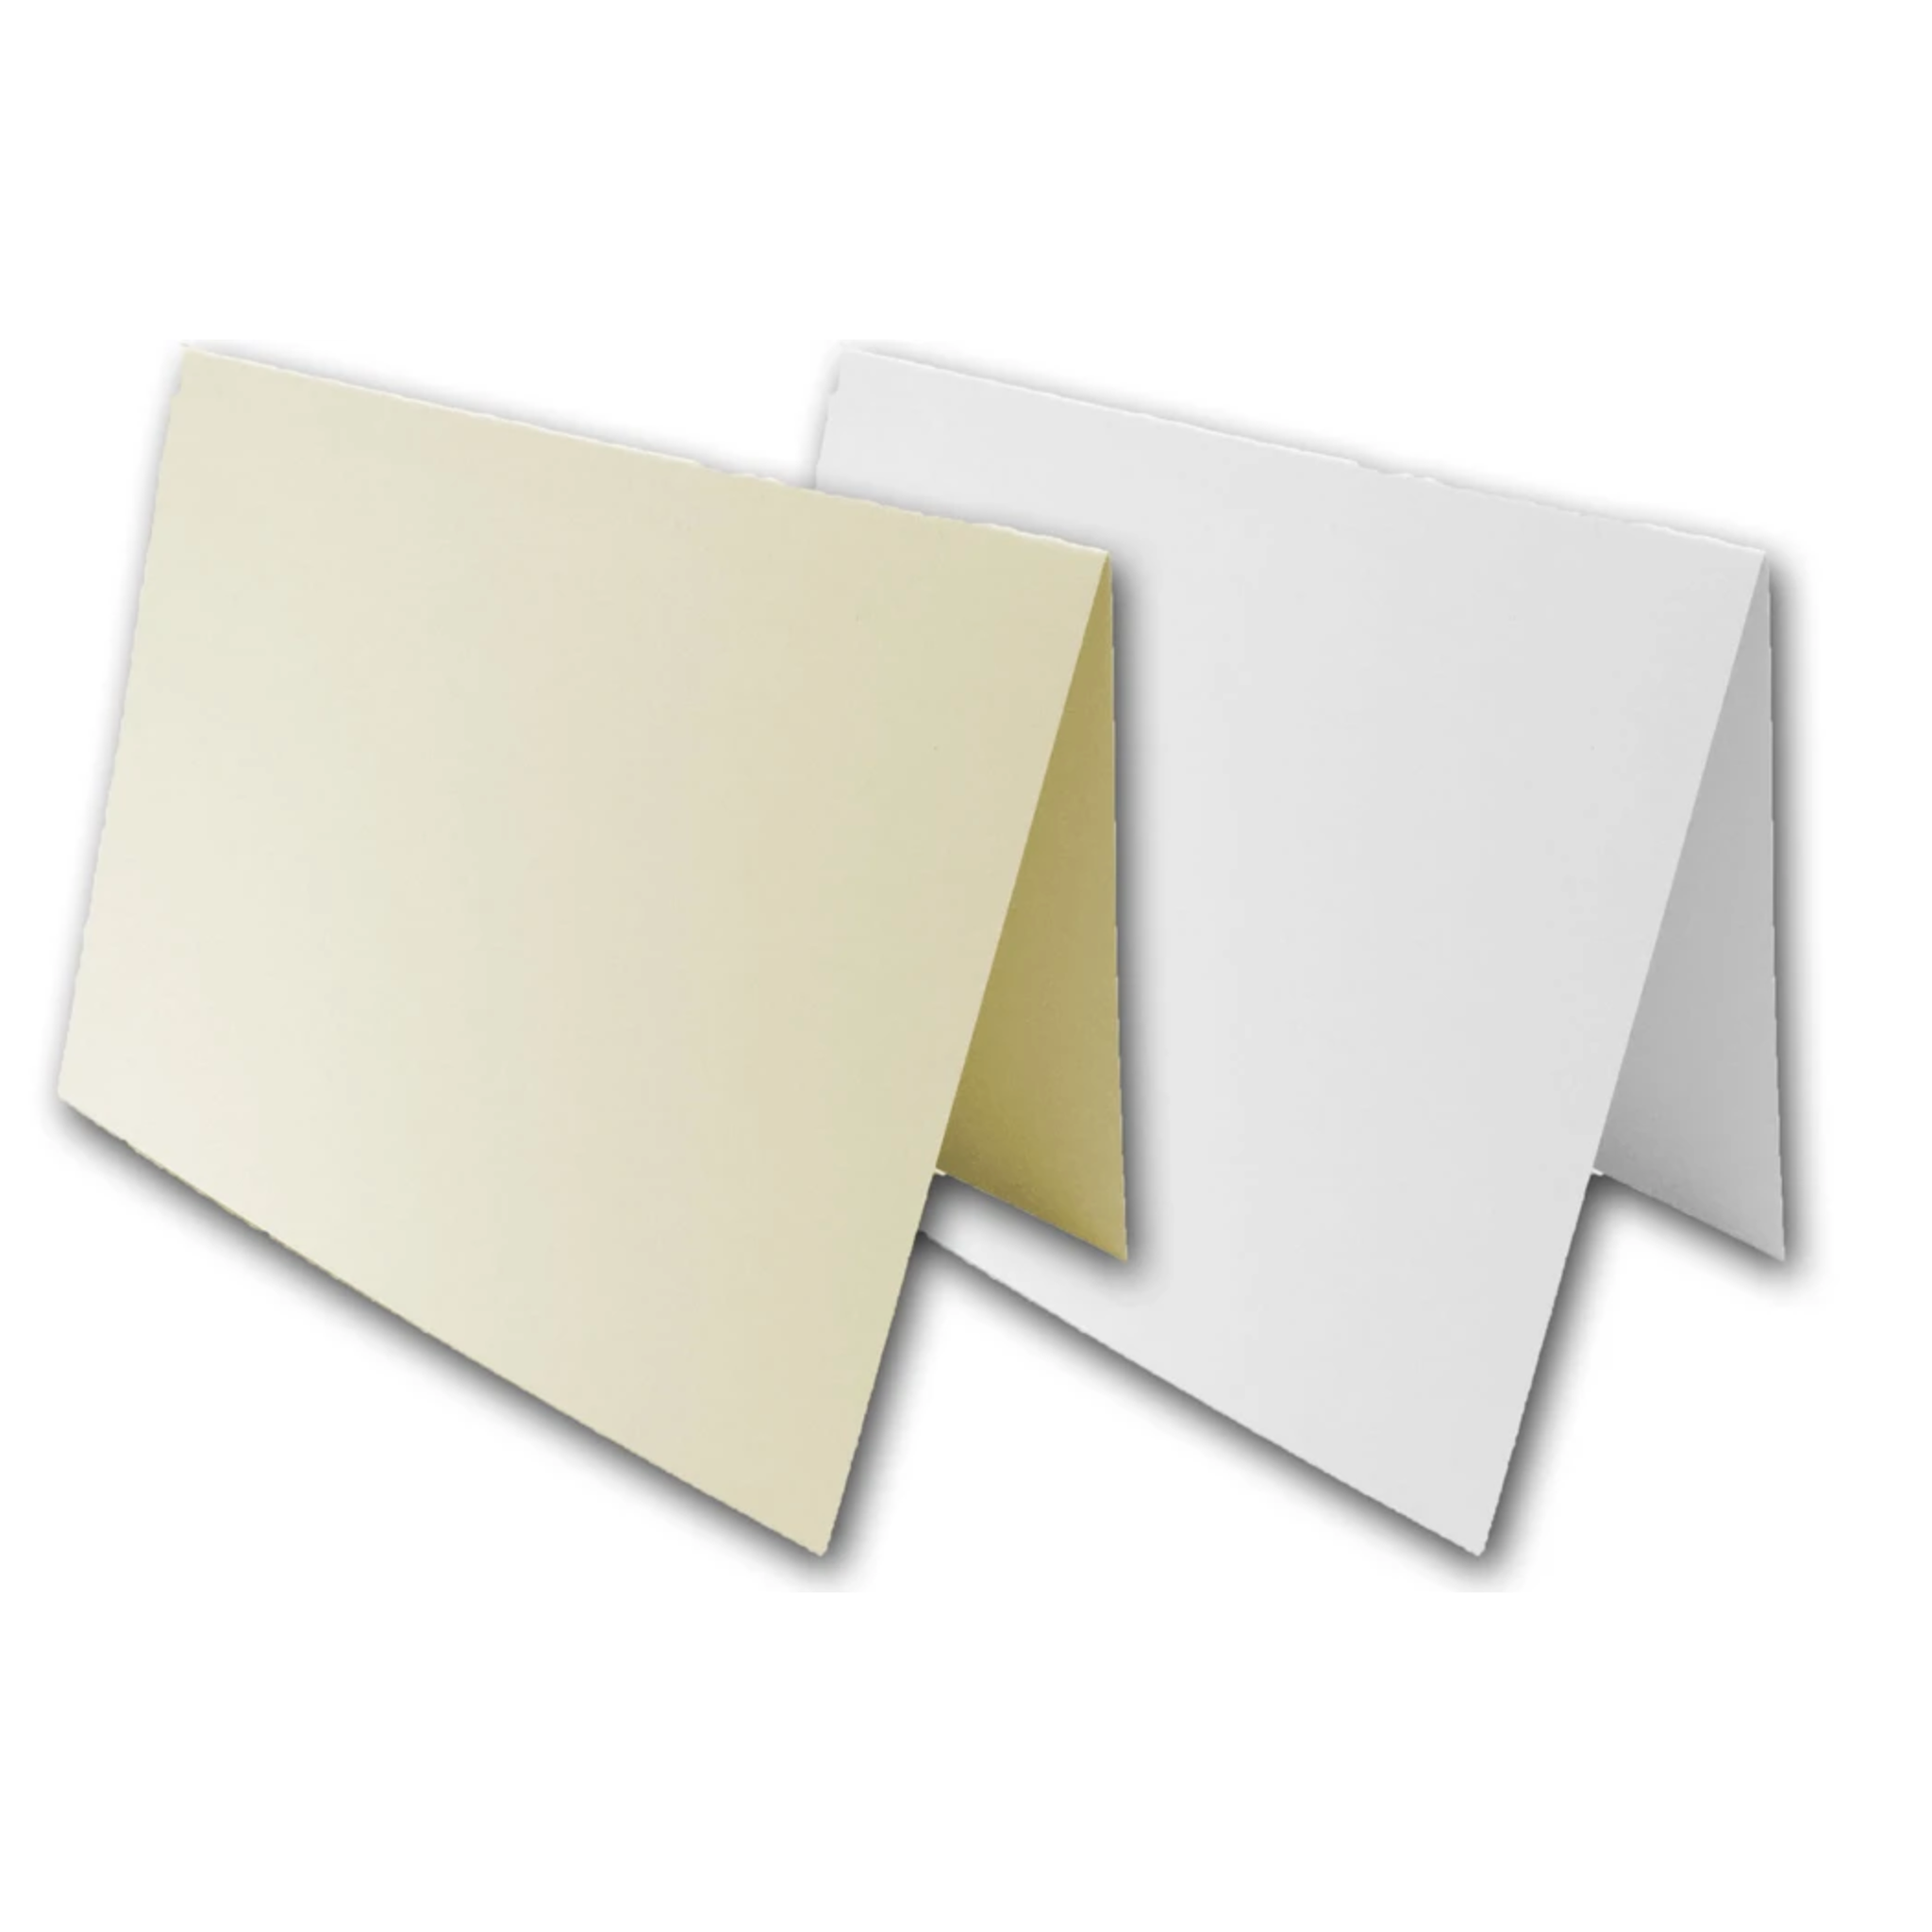 A2 Blank Cards and Envelopes (Set of 10)